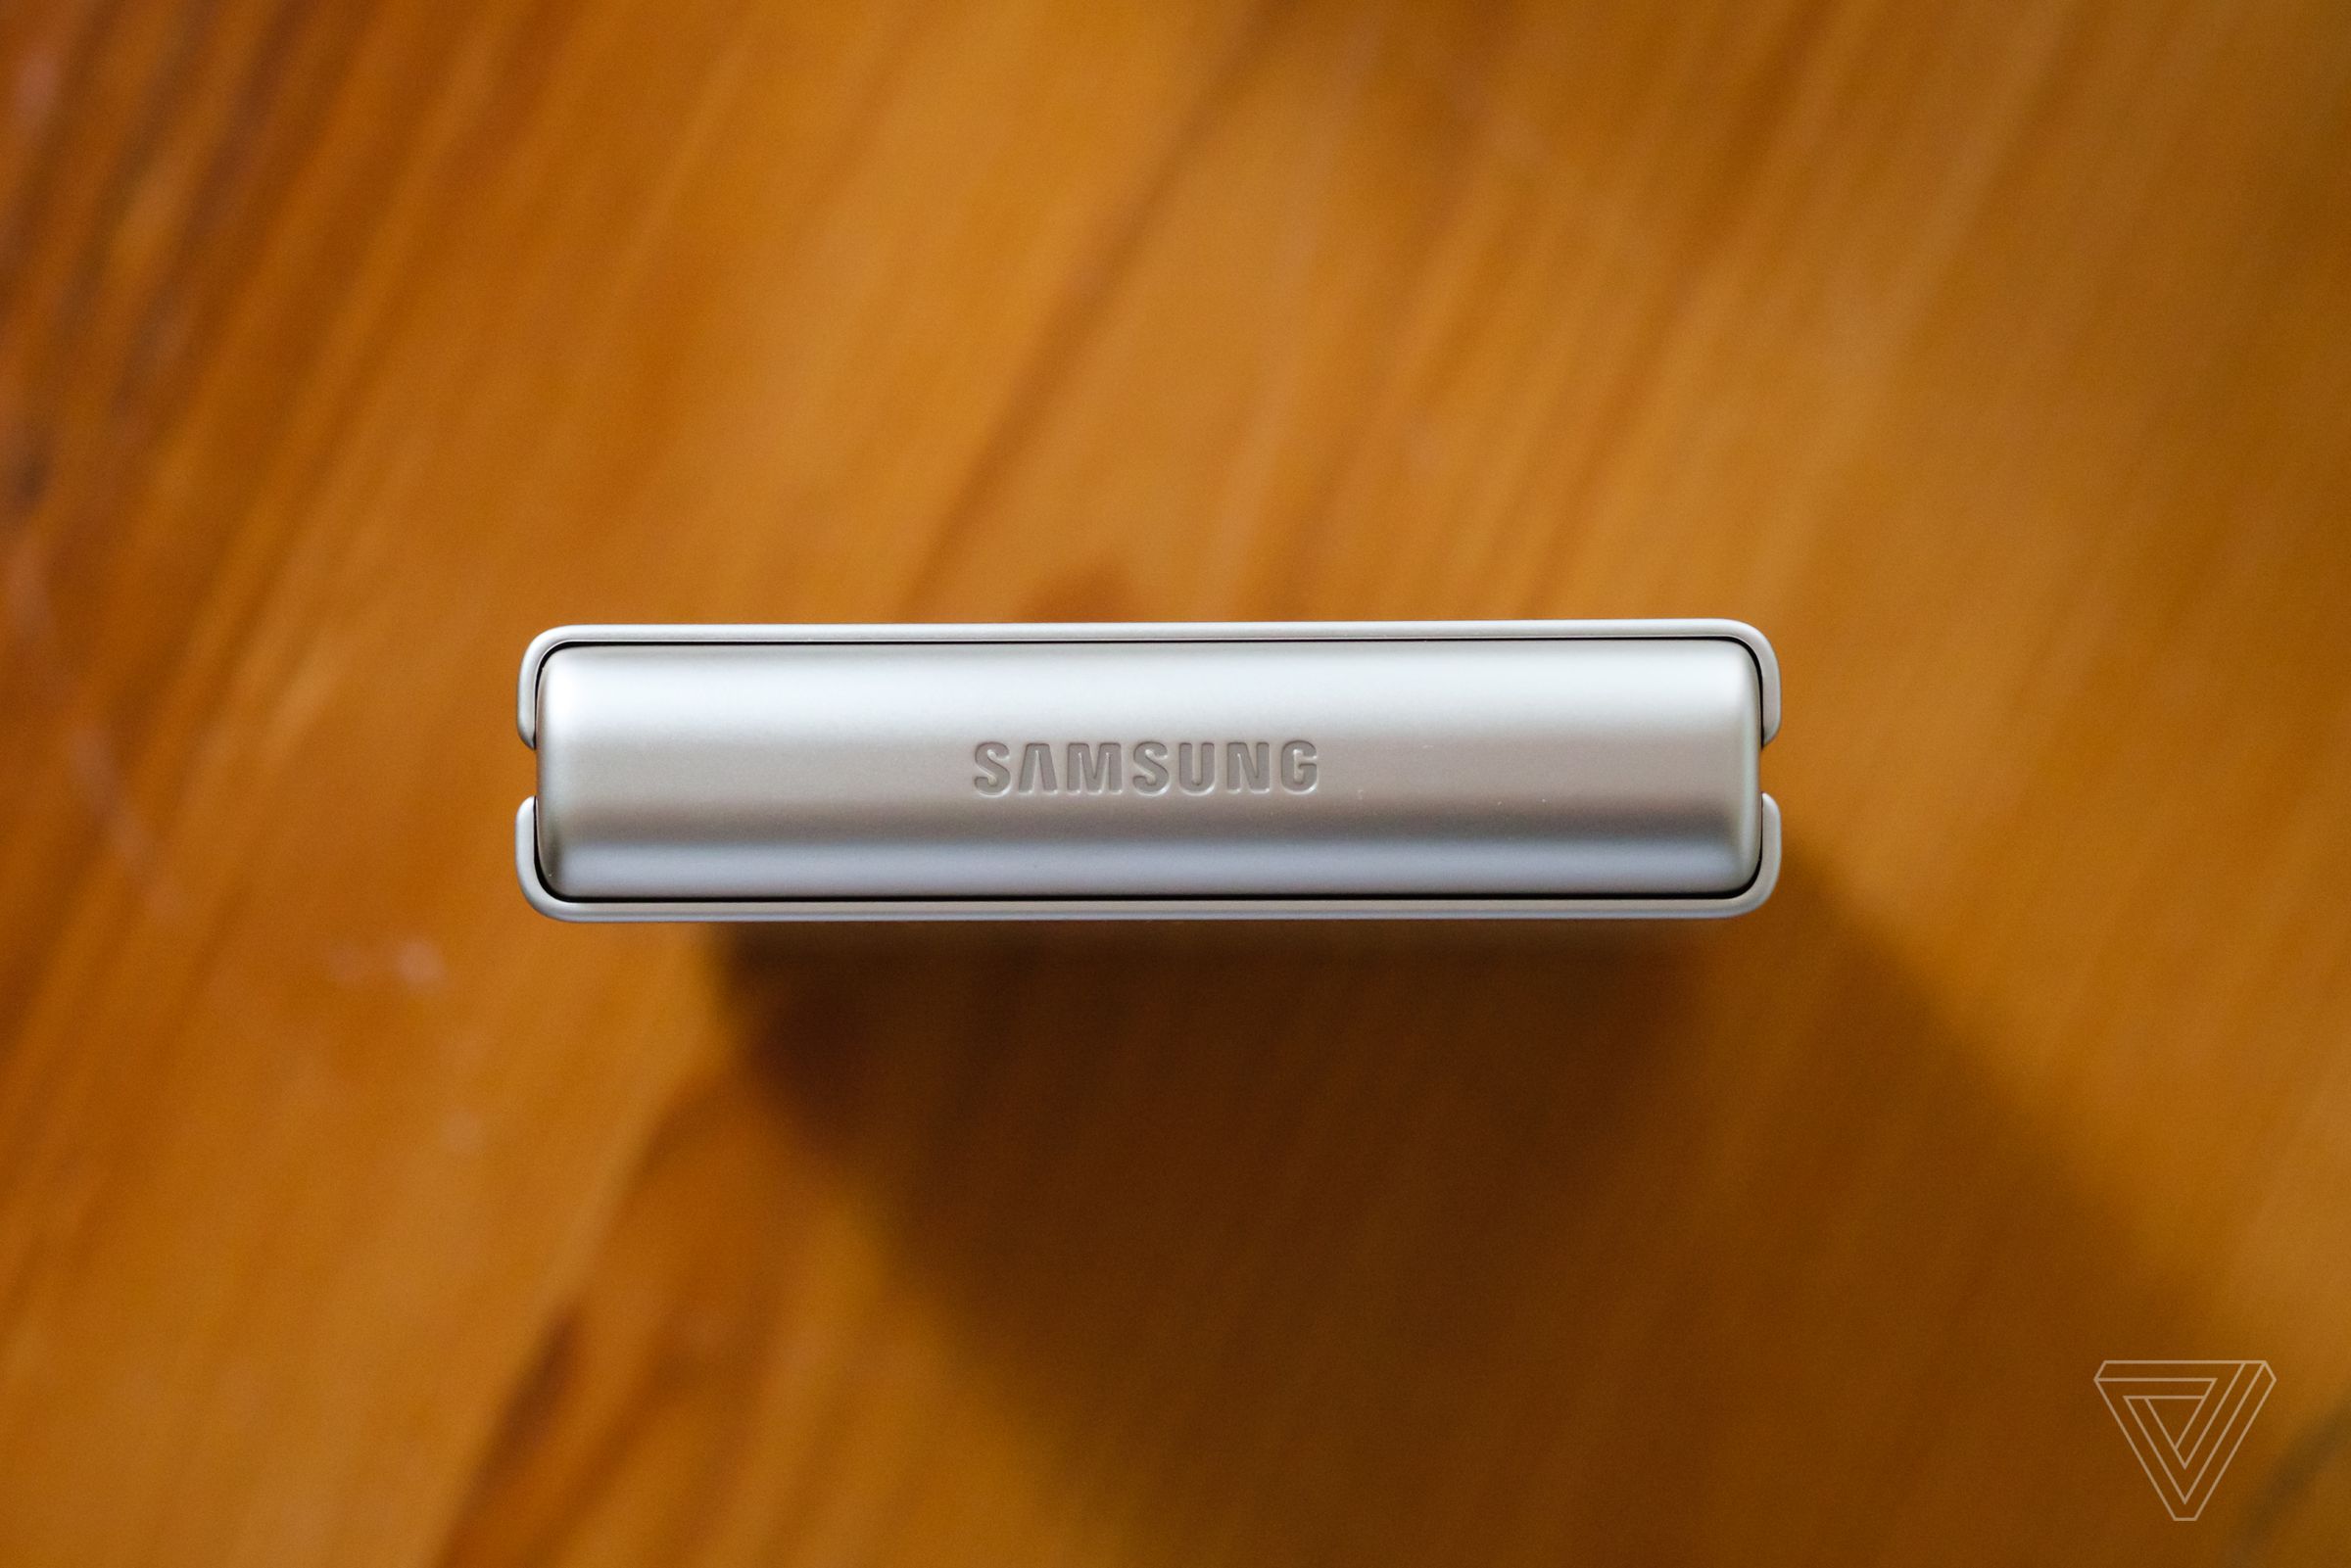 The hinge design is largely unchanged, but Samsung is using a new lubricant and aluminum alloy.